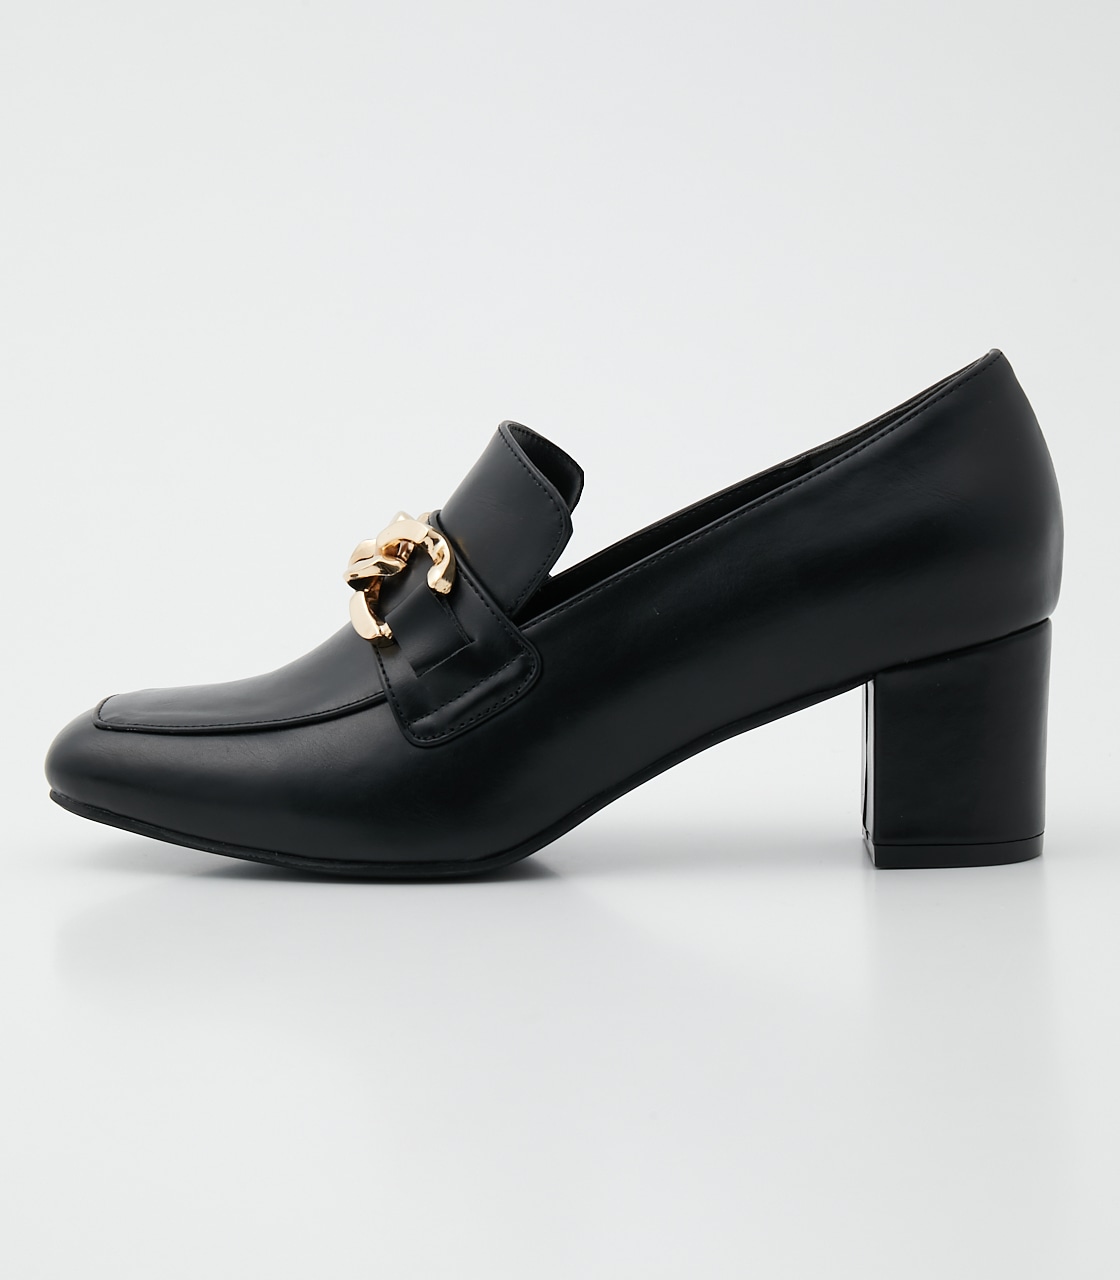 GOLD METAL LOAFER/ゴールドメタルローファー 詳細画像 BLK 2